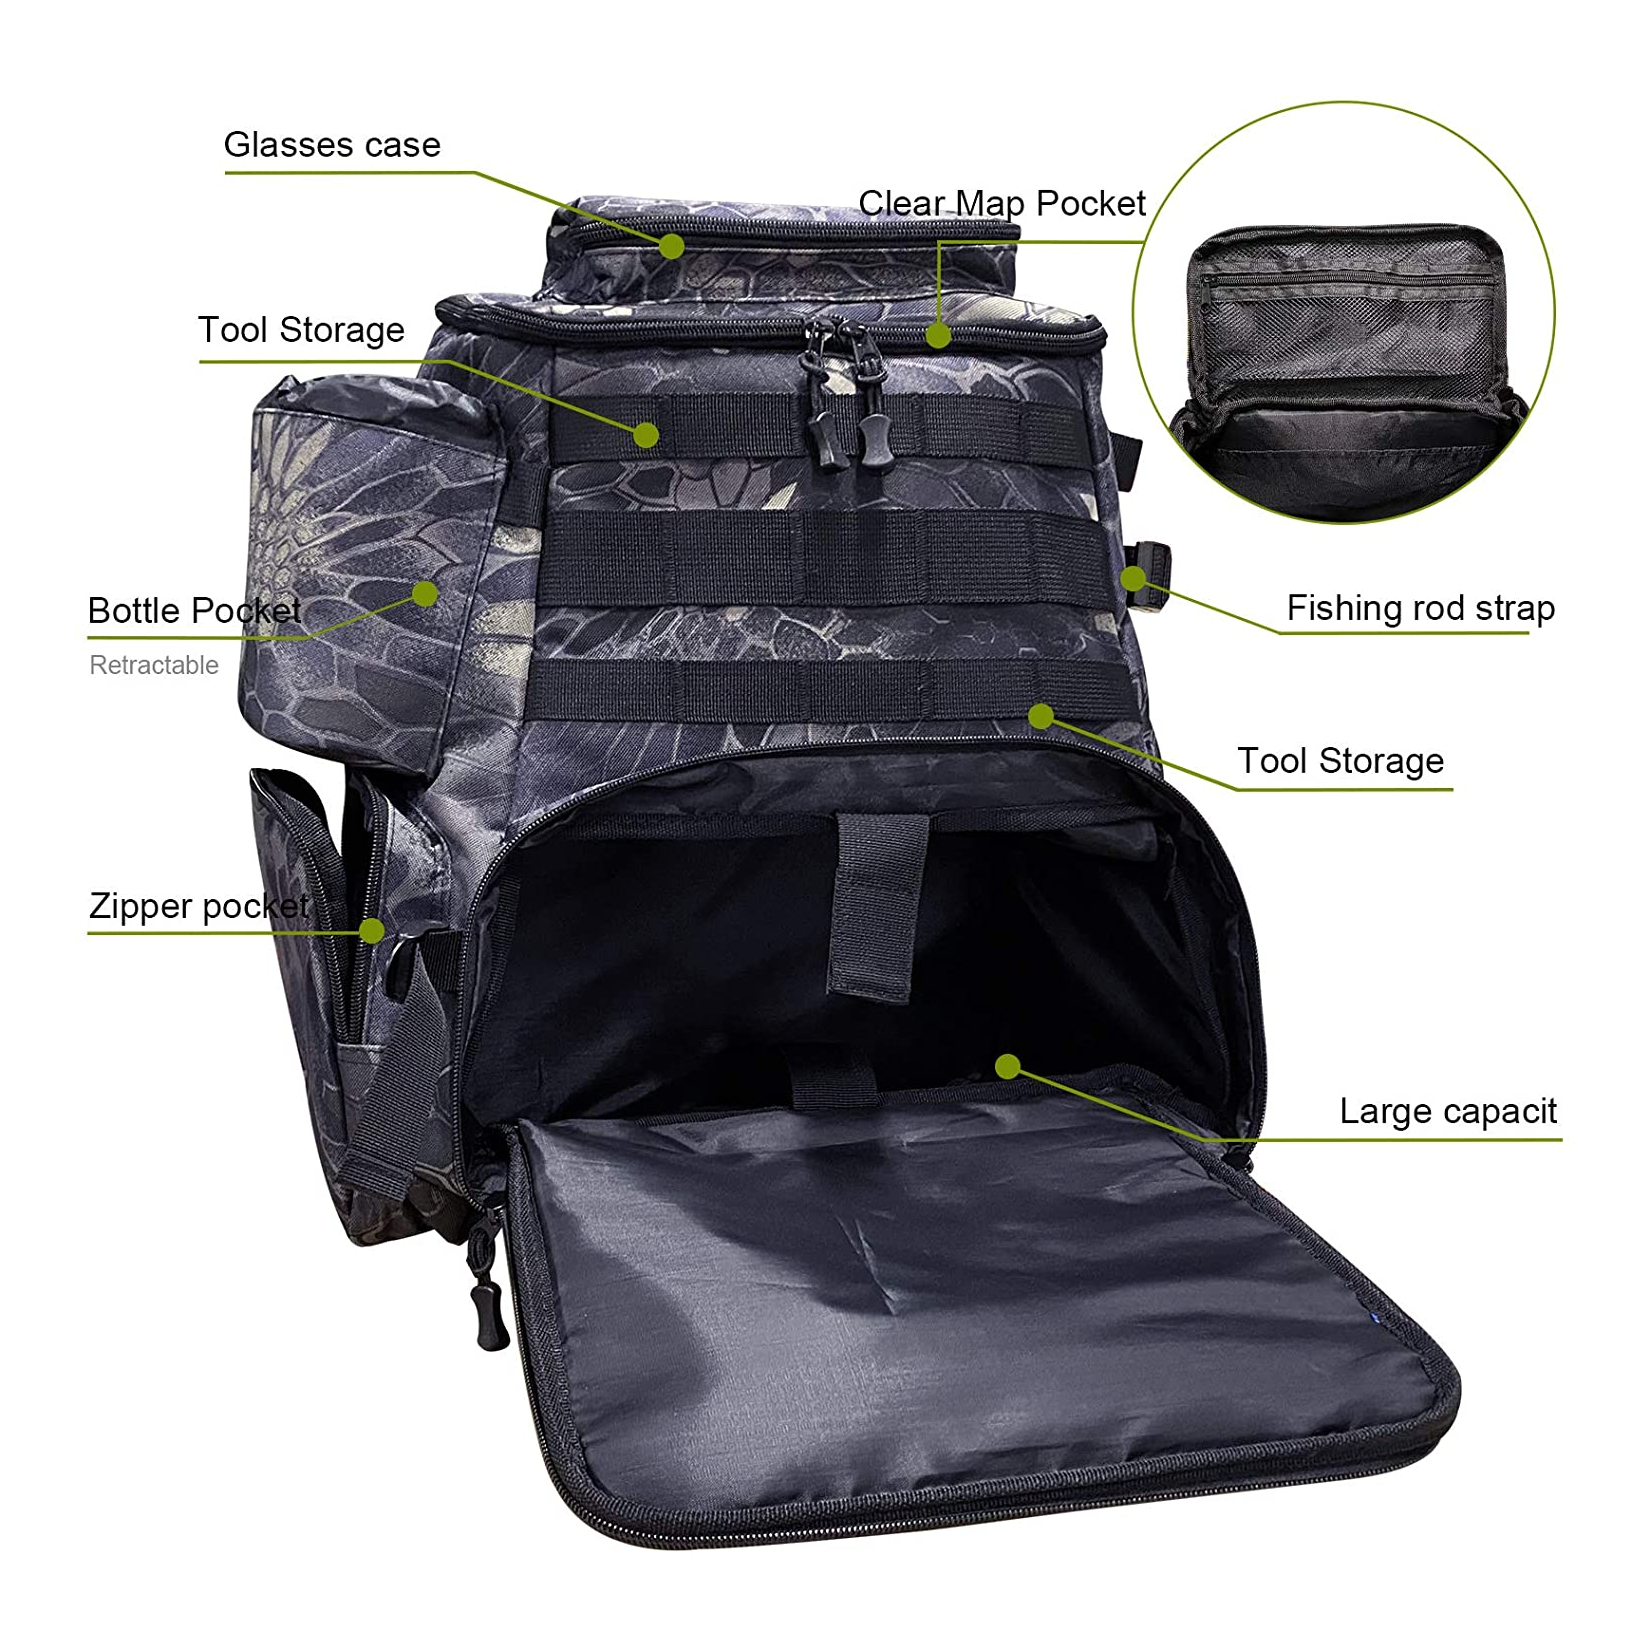 https://backpacks.global/compare/wp-content/uploads/Thekuai-Fishing-Tackle-Backpack-Front-Detail-View.png